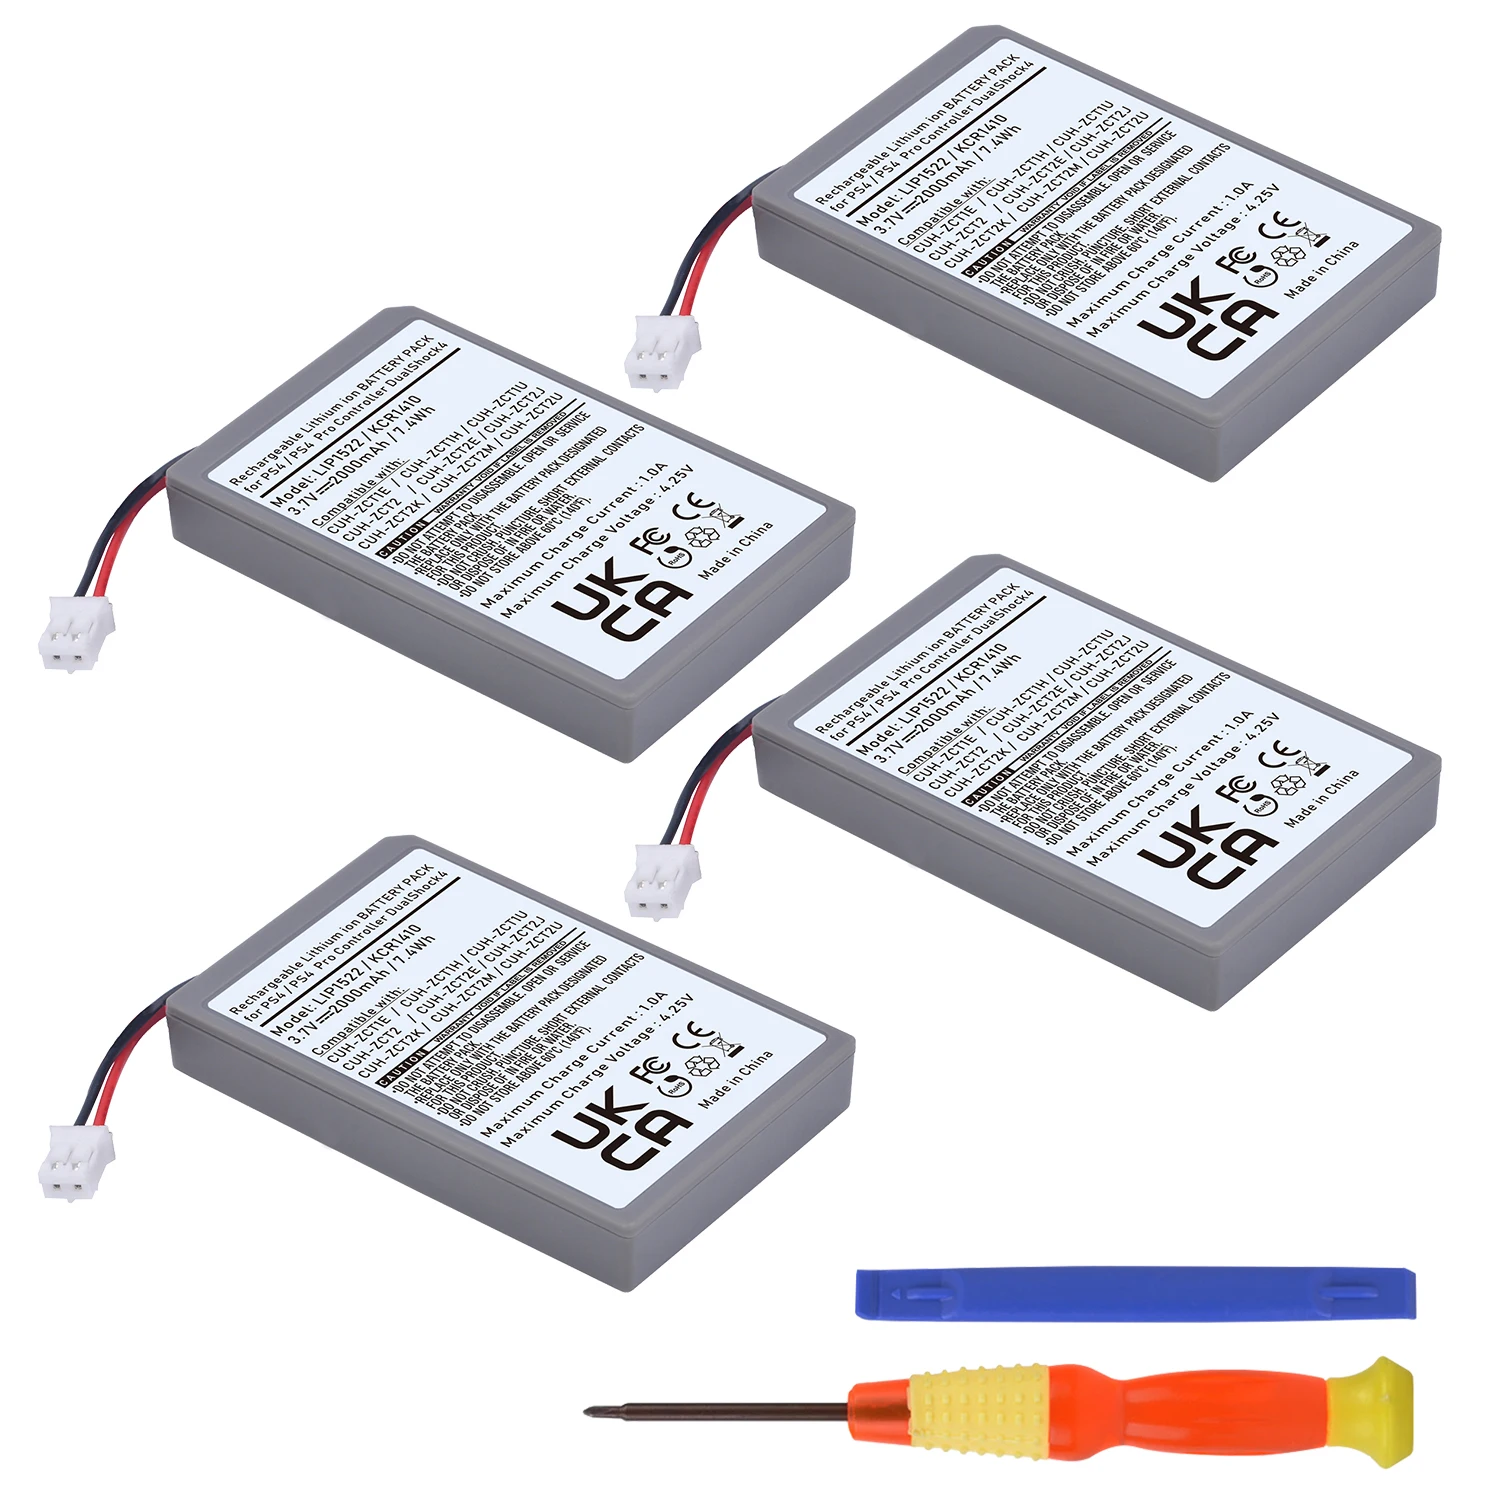 4x 3.7V 2000mAh For SONY PS4 PS4 PRo slim LIP1522 Dualshock 4 V1 V2 Wireless Controller Playstation GamePad Rechargeable Battery